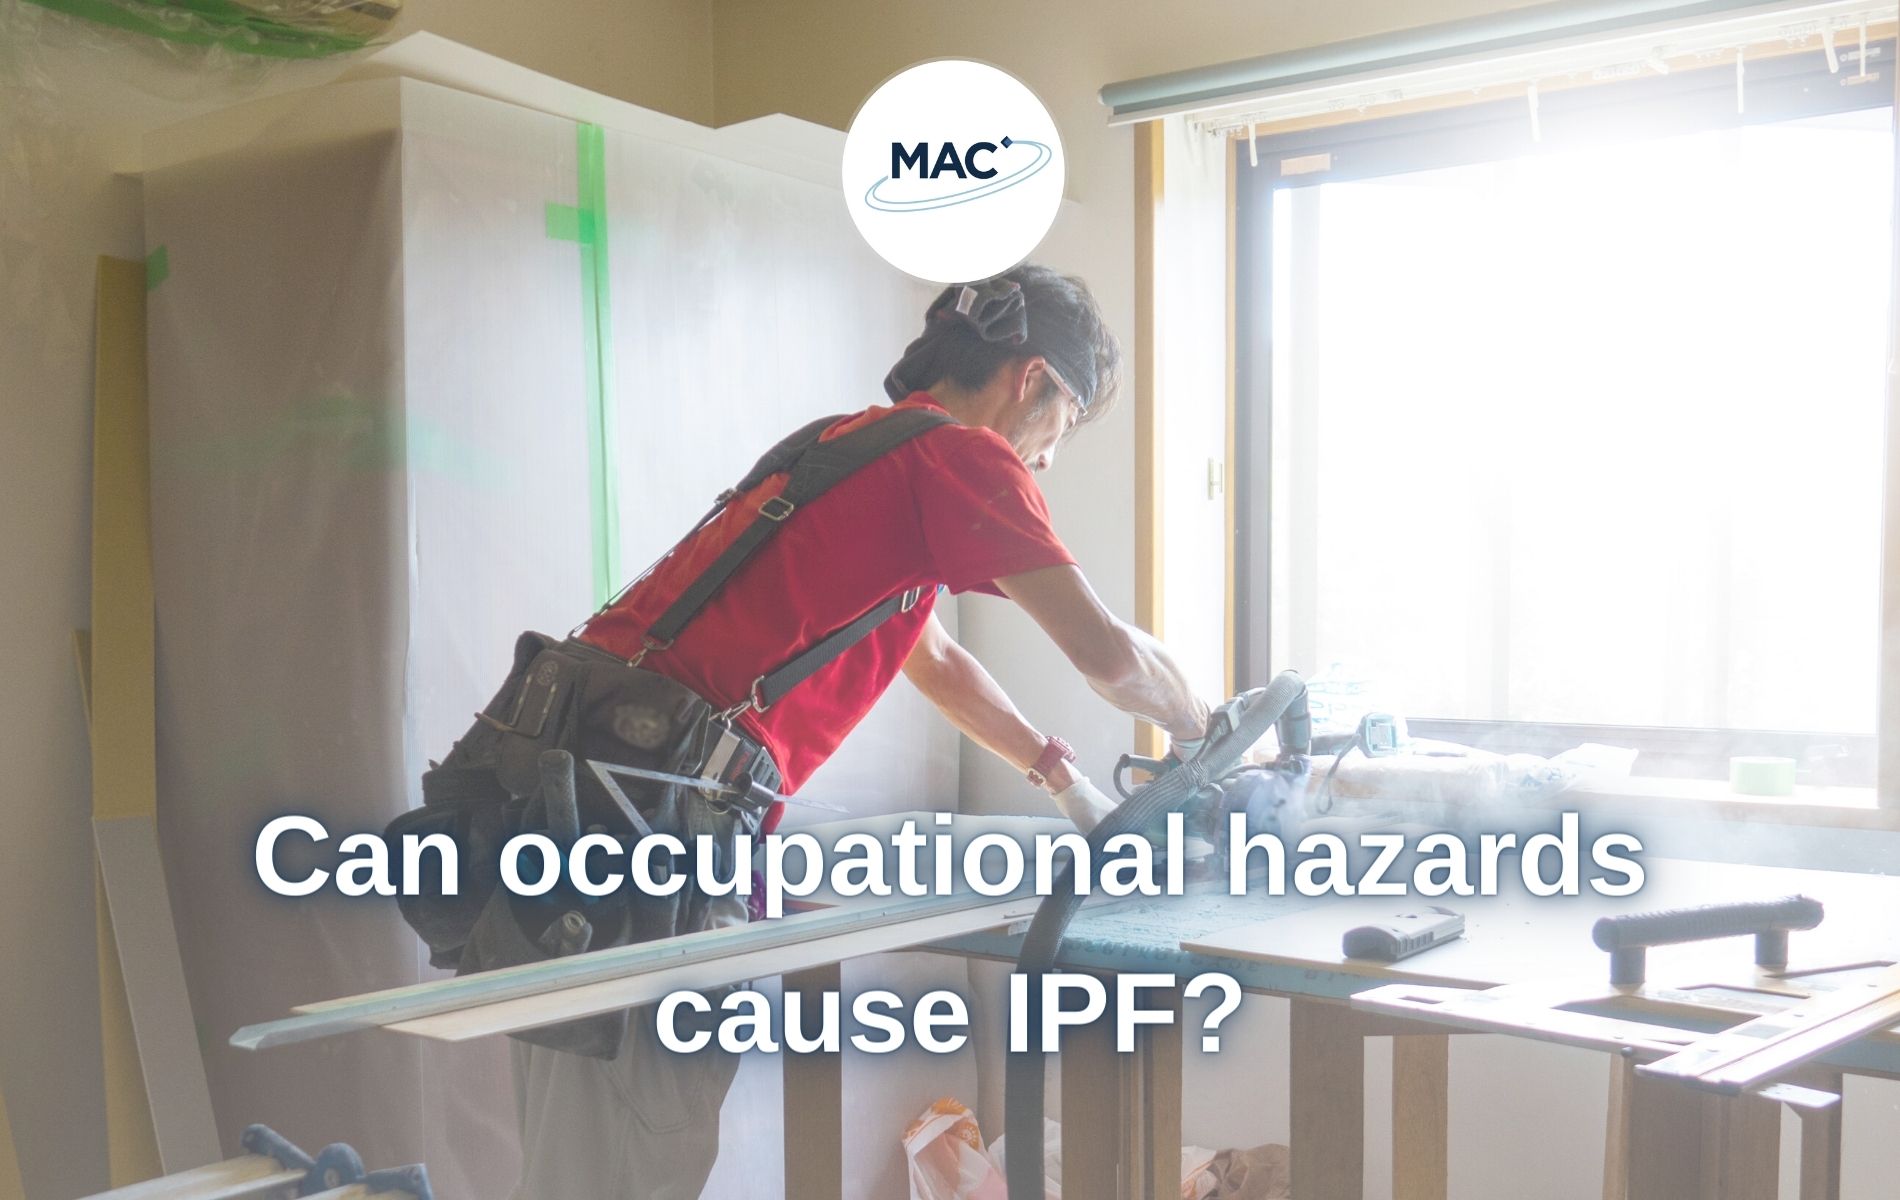 can occupational hazards cause IPF